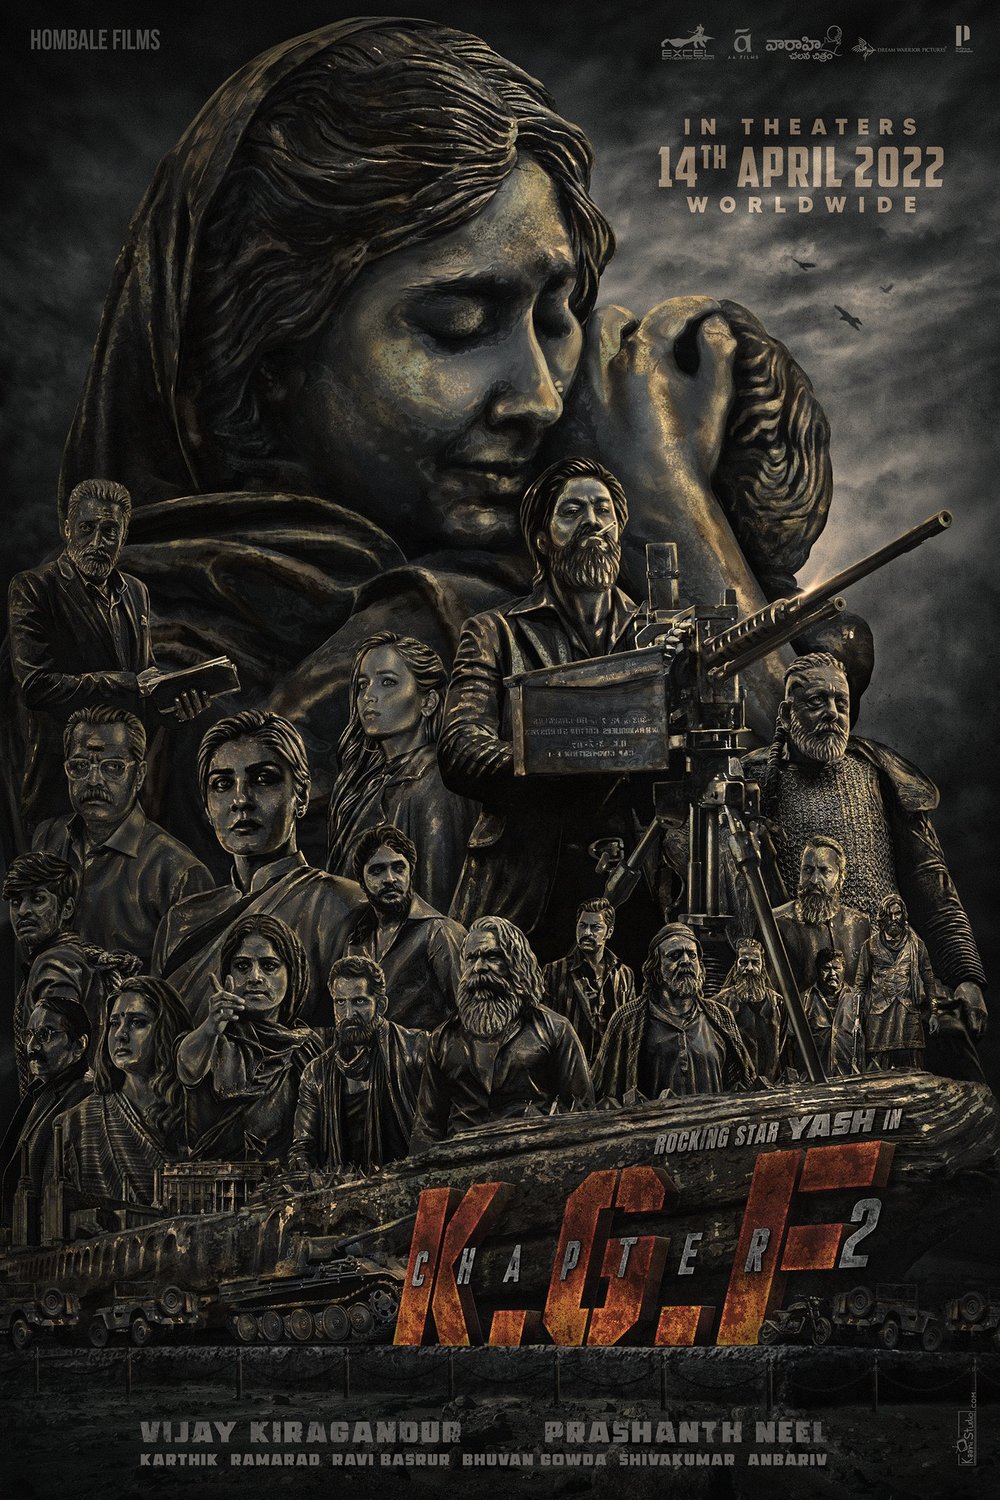 Kannada poster of the movie K.G.F: Chapter 2